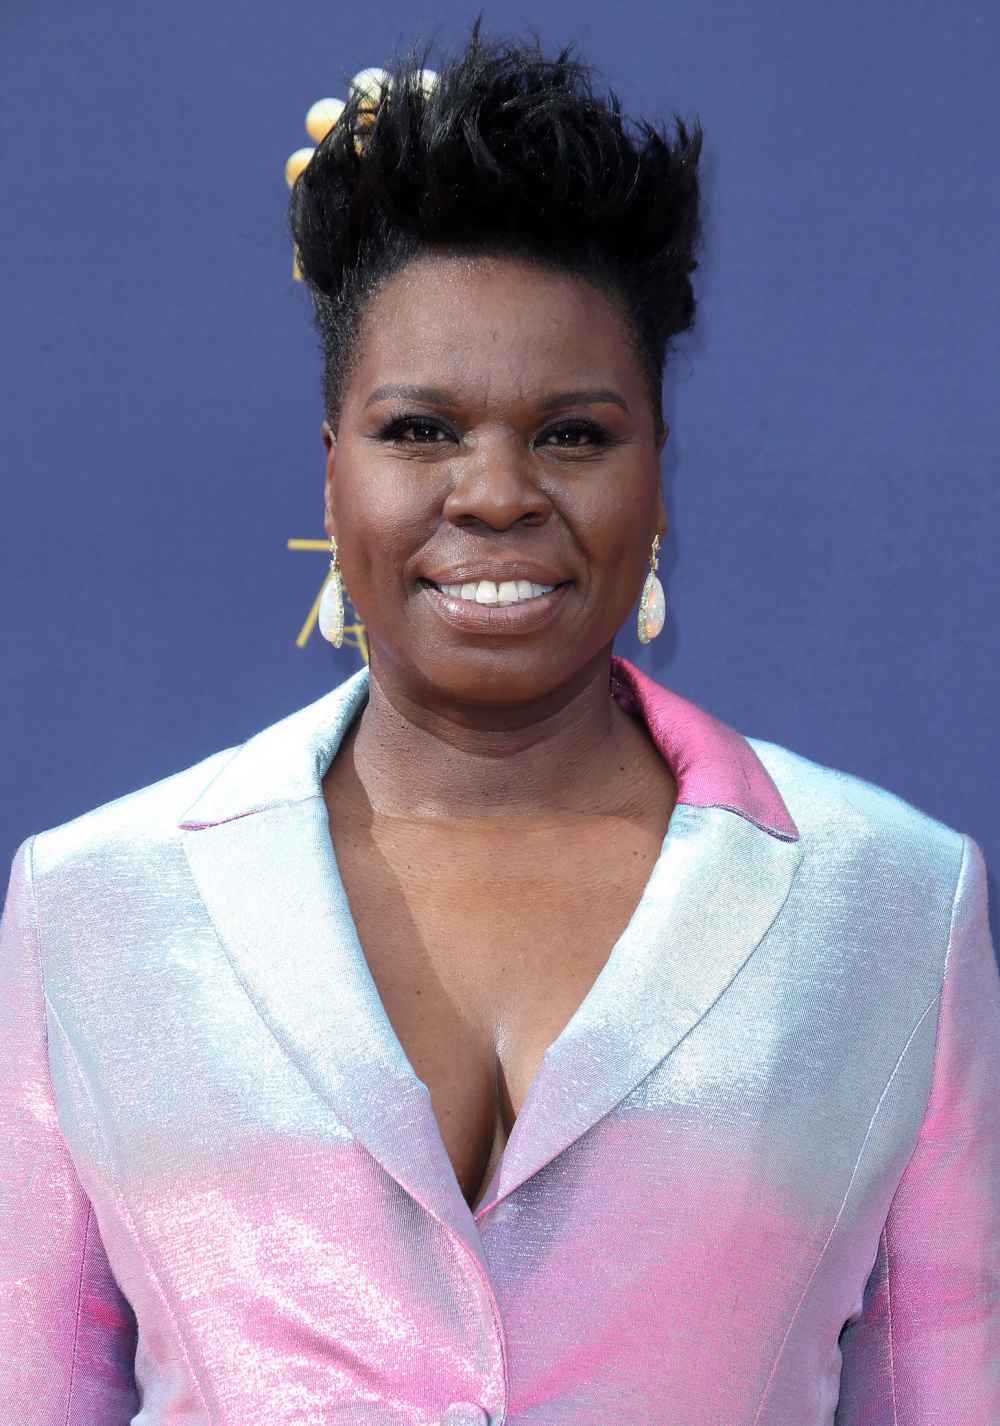 Leslie Jones: Google What You Need to Know About Black Hair